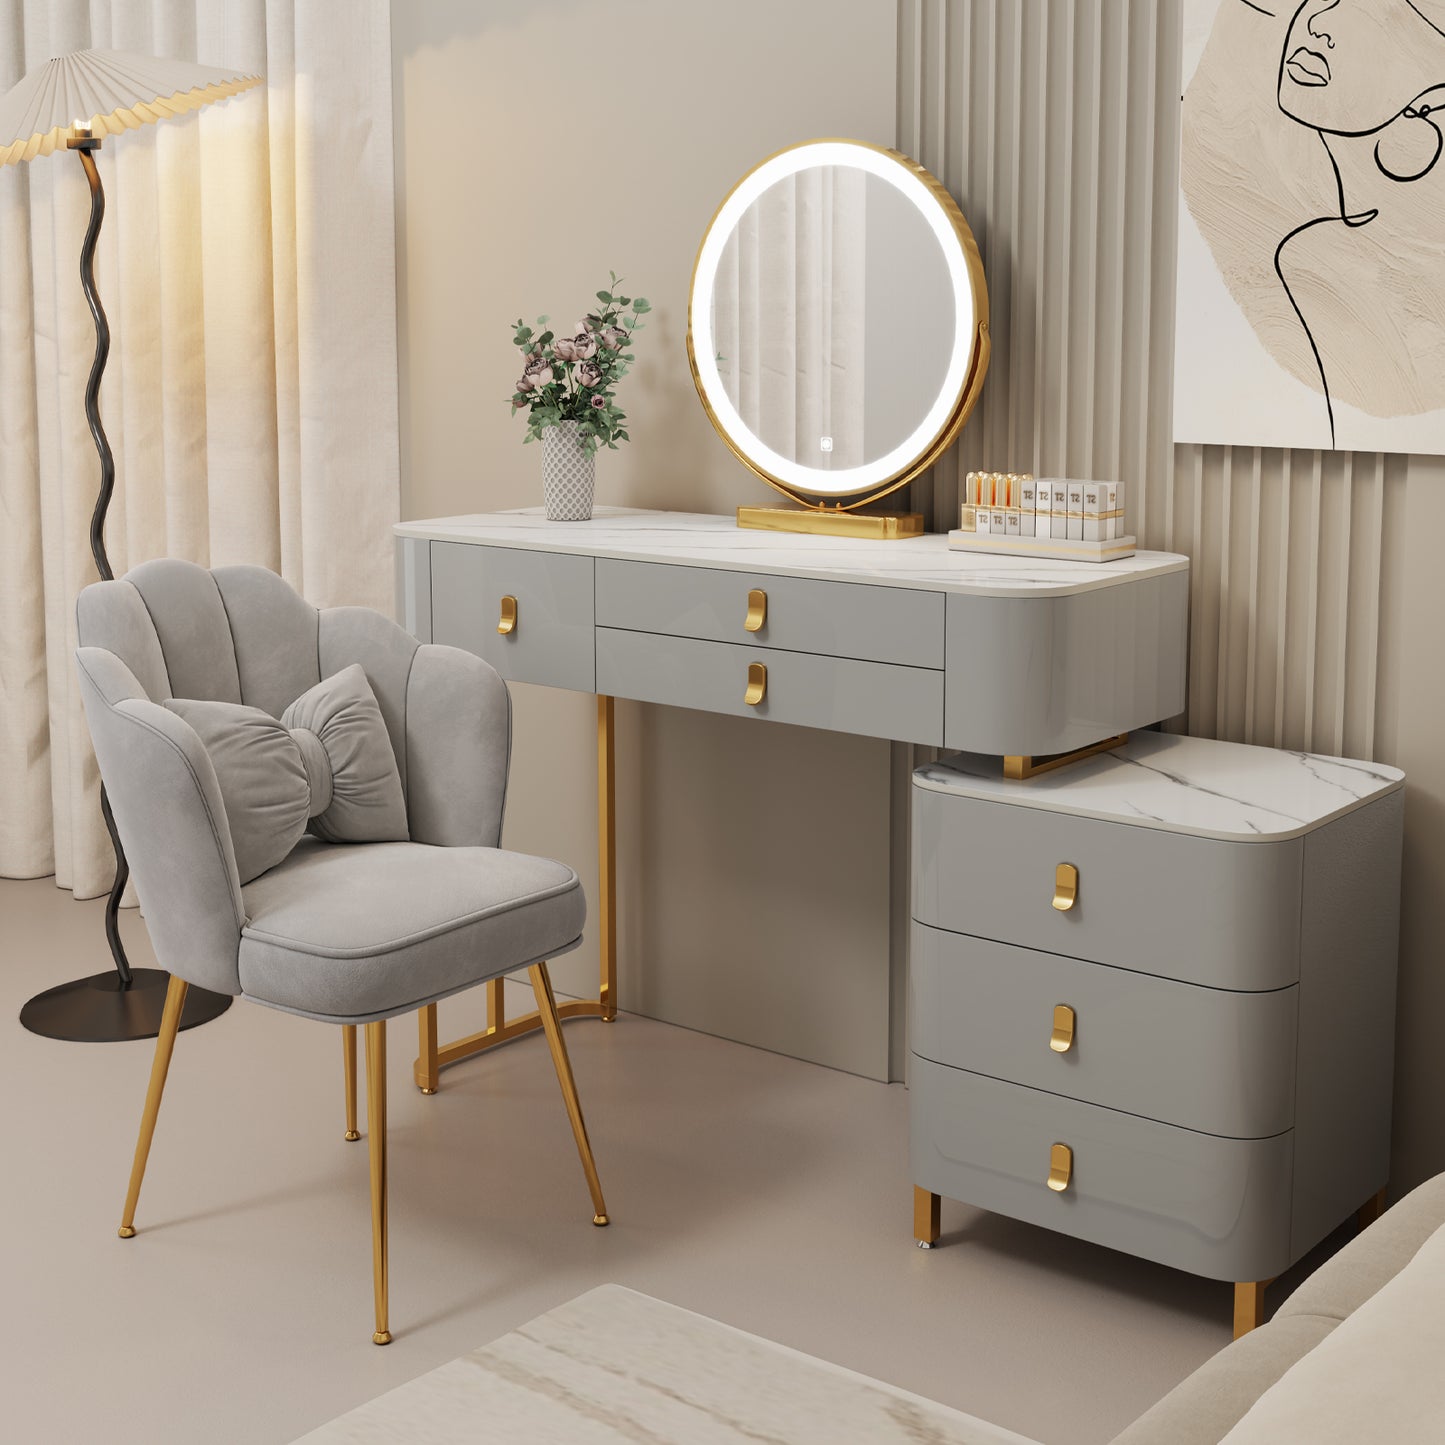 Luxuary vanity set with Cabinet, Adjustable Brightness Mirror and